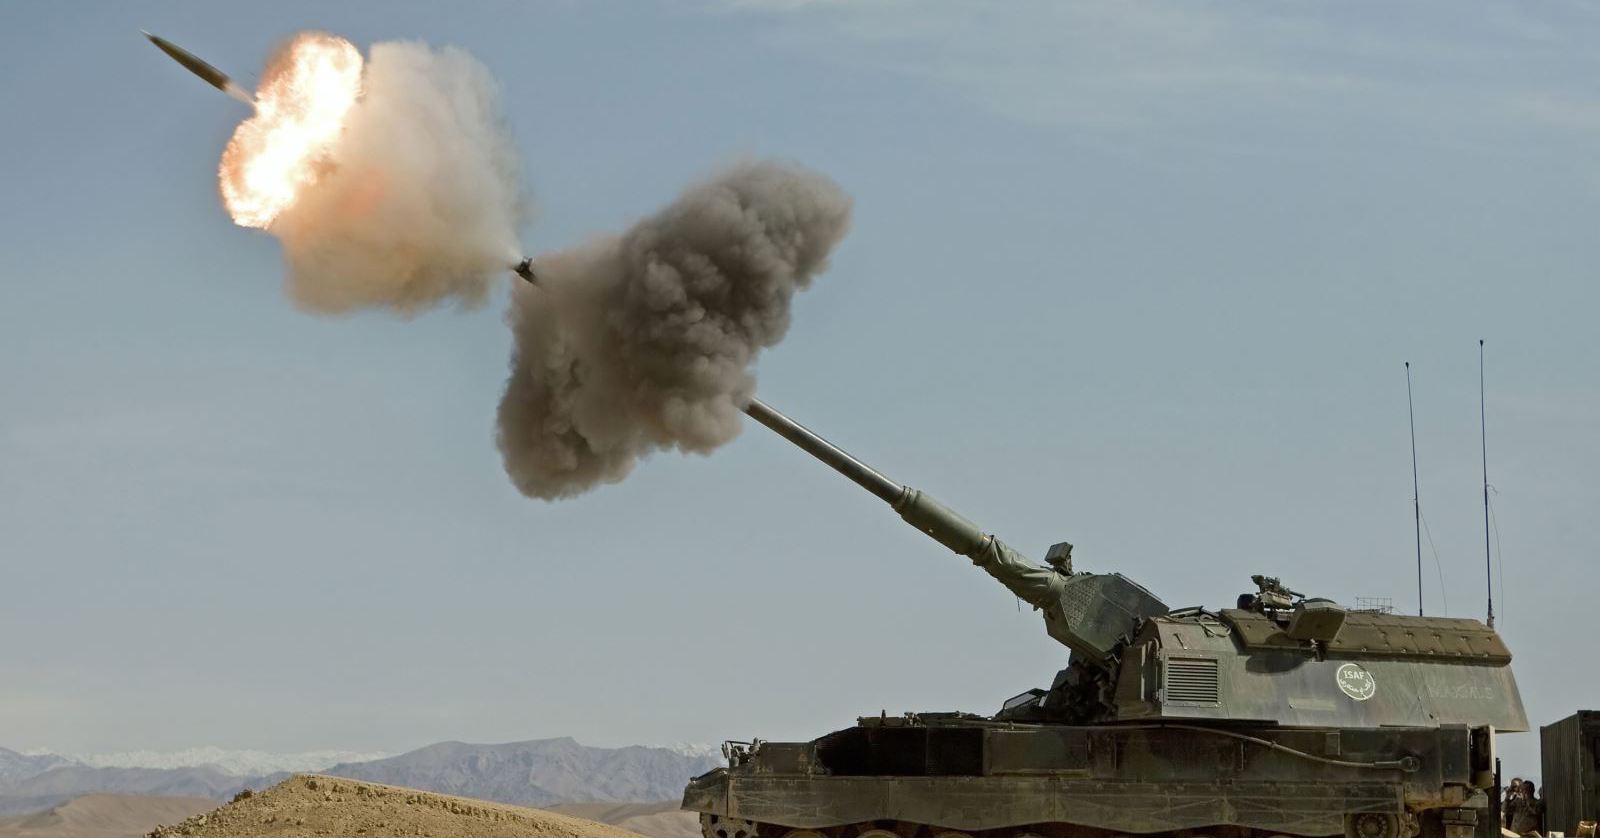 The Netherlands suddenly announced that it could not send more armored howitzers to Ukraine